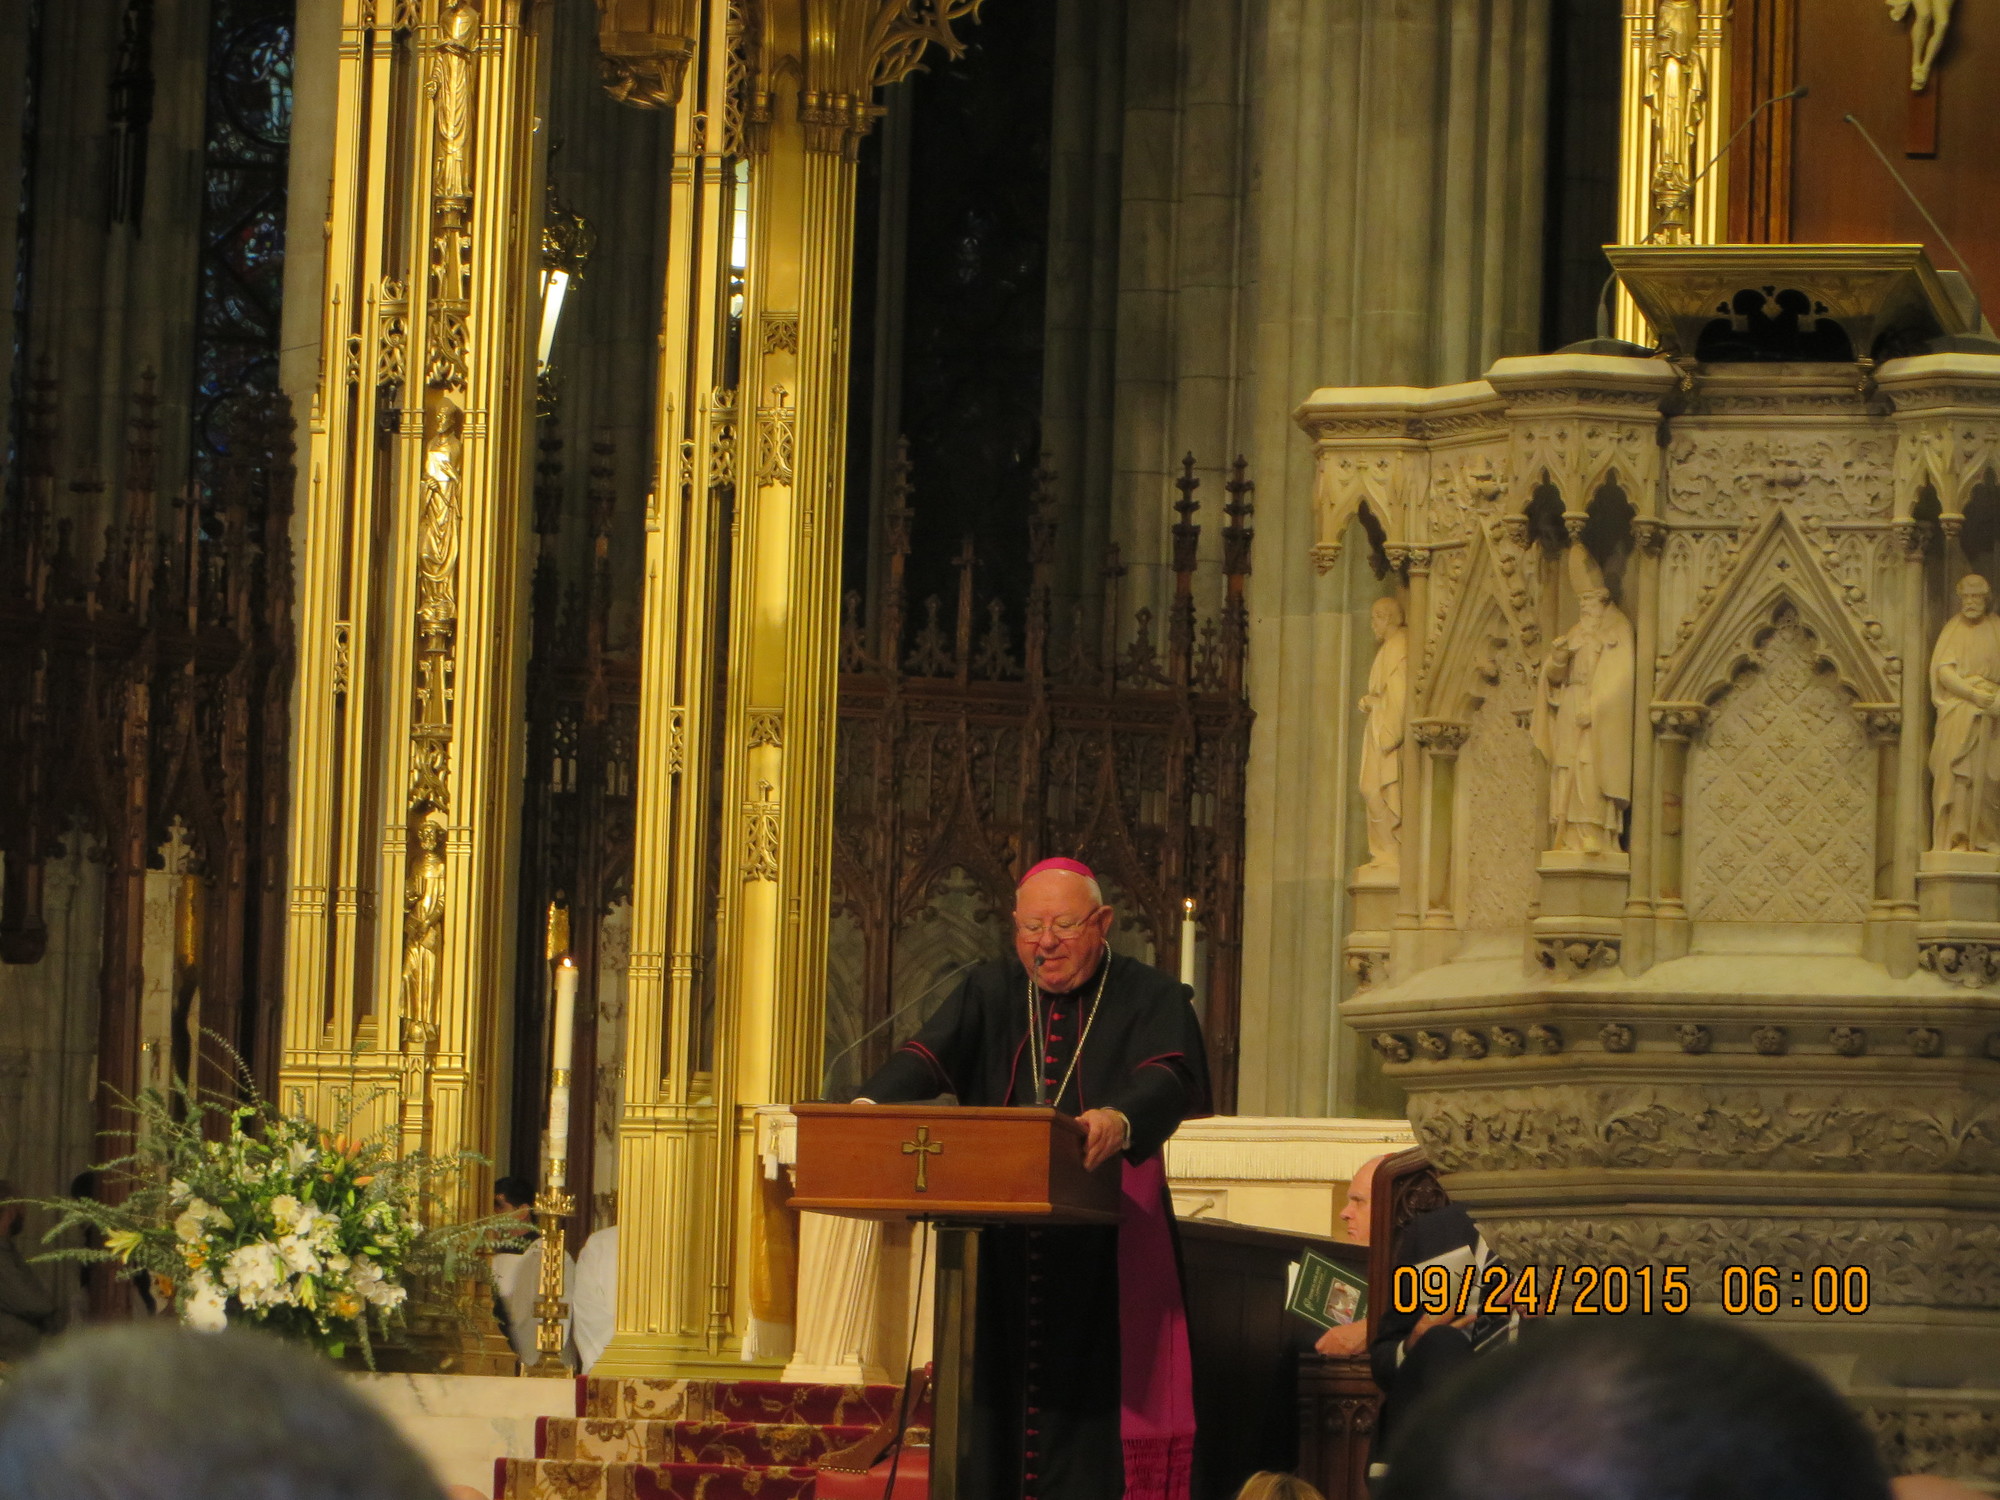 Bishop William Murphy, leader of the Diocese of Rockville Centre, spoke at the pope’s vespers at St. Patrick’s Cathedral.